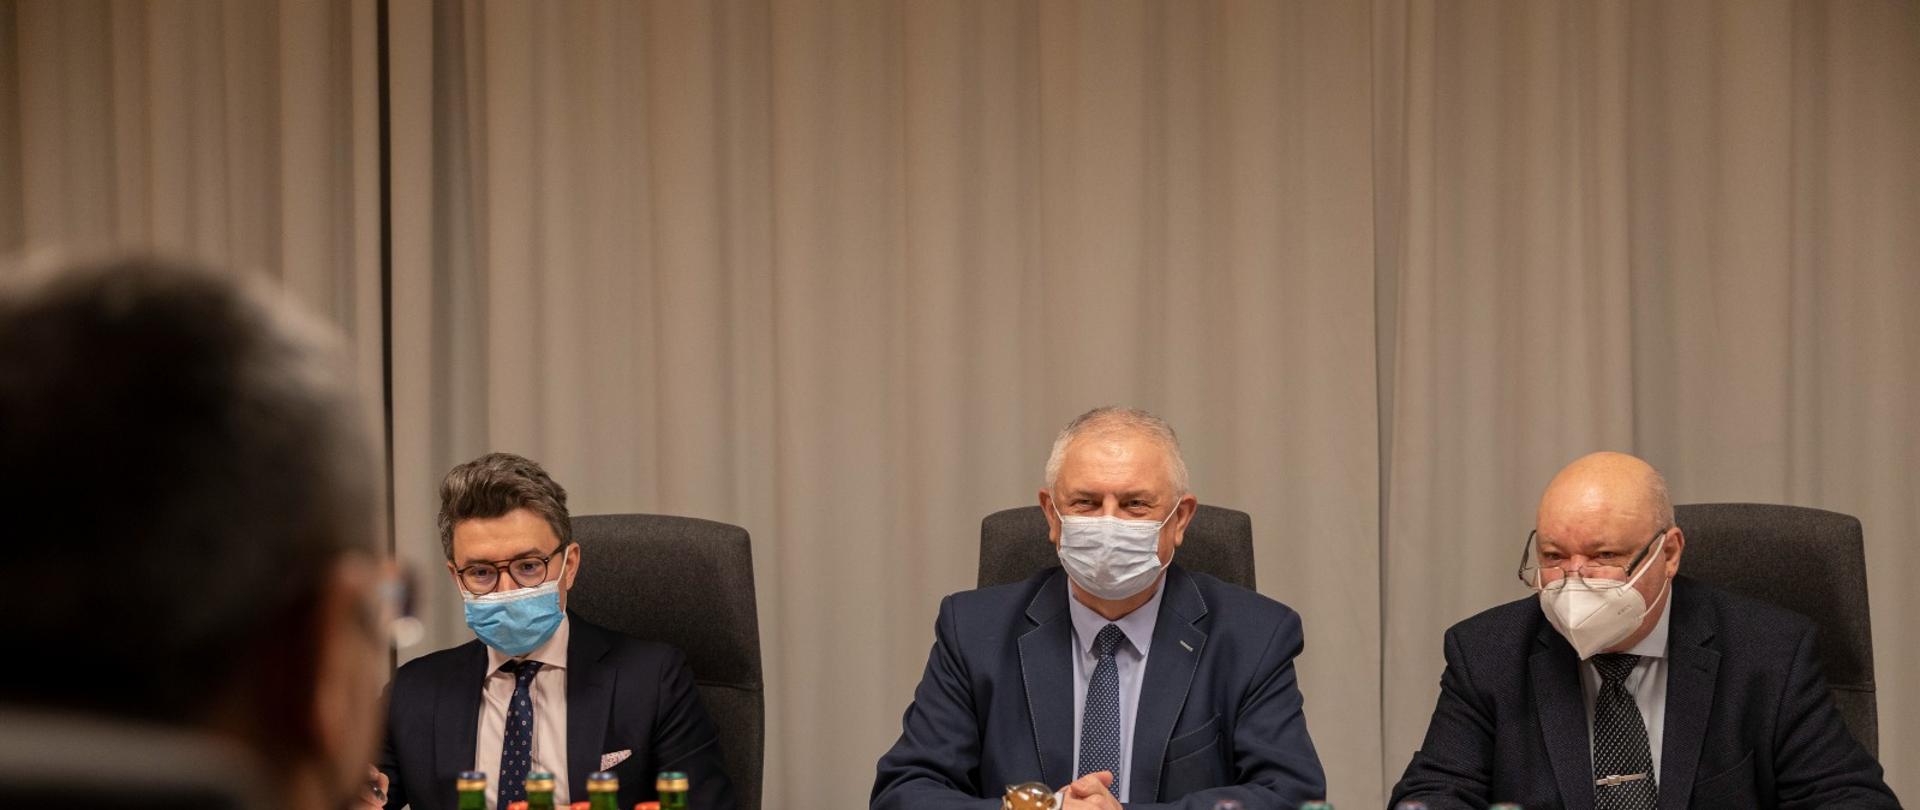 Deputy Minister Grzegorz Piechowiak during the meeting with Azerbaijan Ambassador. He sits behind a table with a mask on his face.